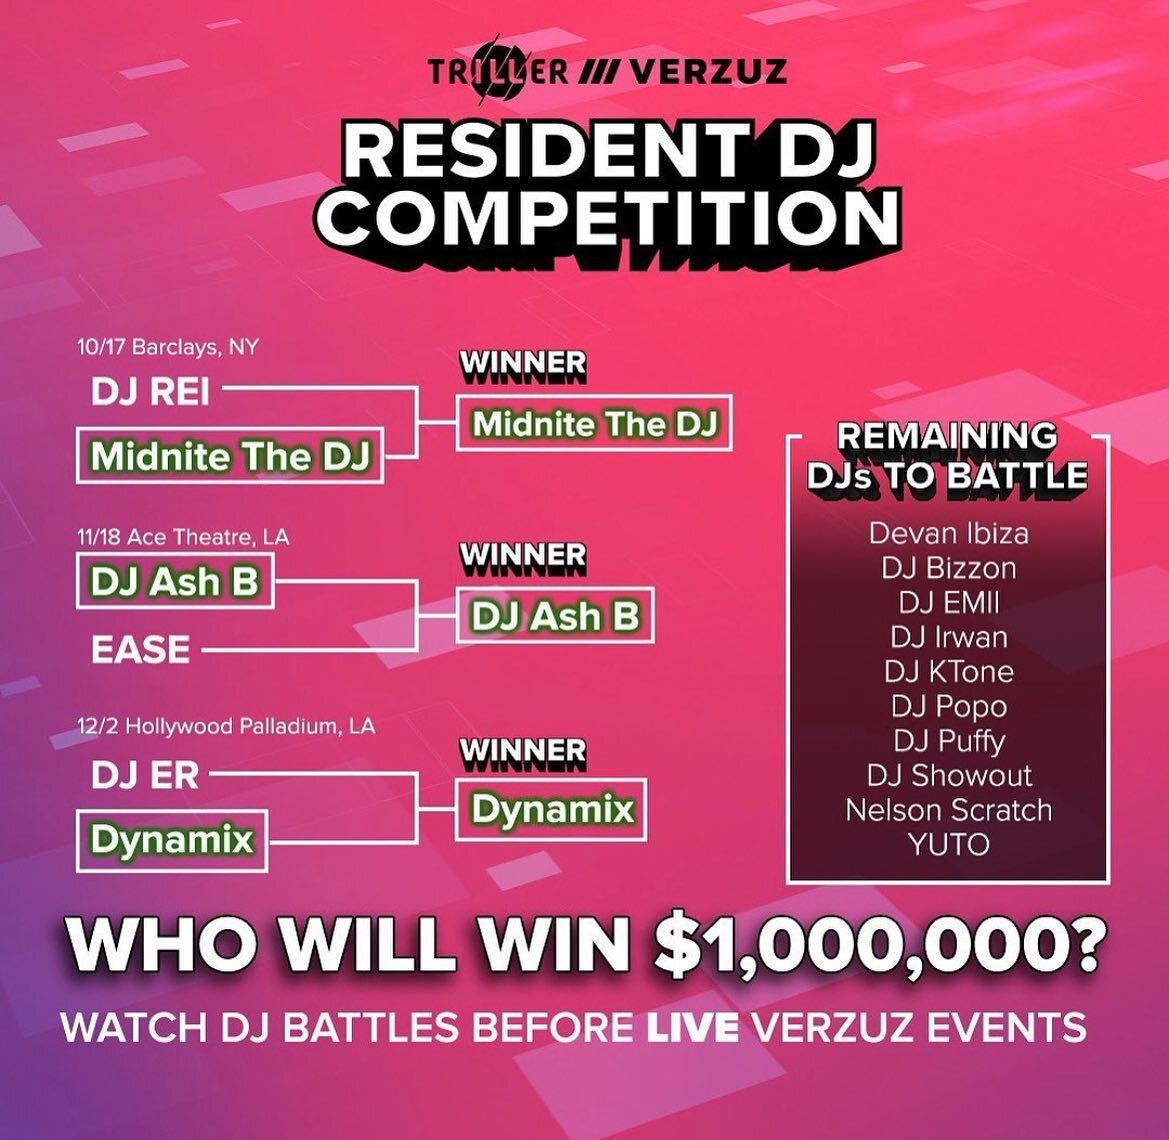 Haven&rsquo;t really said anything to y&rsquo;all &hellip; but I made the top 16 djs! @triller @verzuztv @therealswizzz @timbaland 🙏🏼
First battle coming soon.